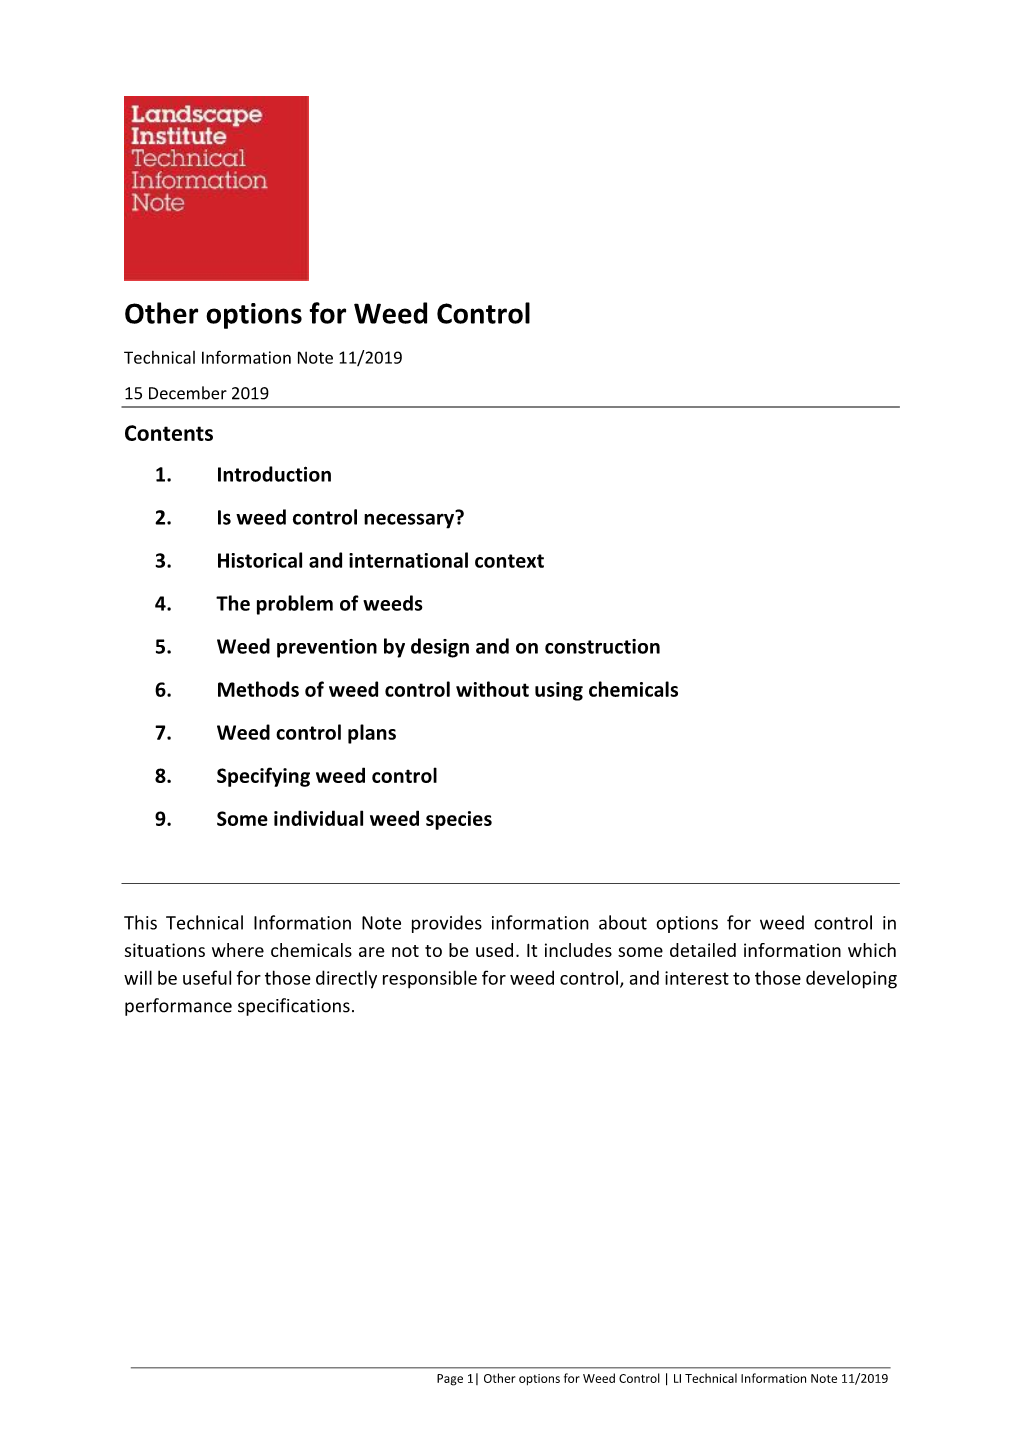 Other Options for Weed Control Technical Information Note 11/2019 15 December 2019 Contents 1